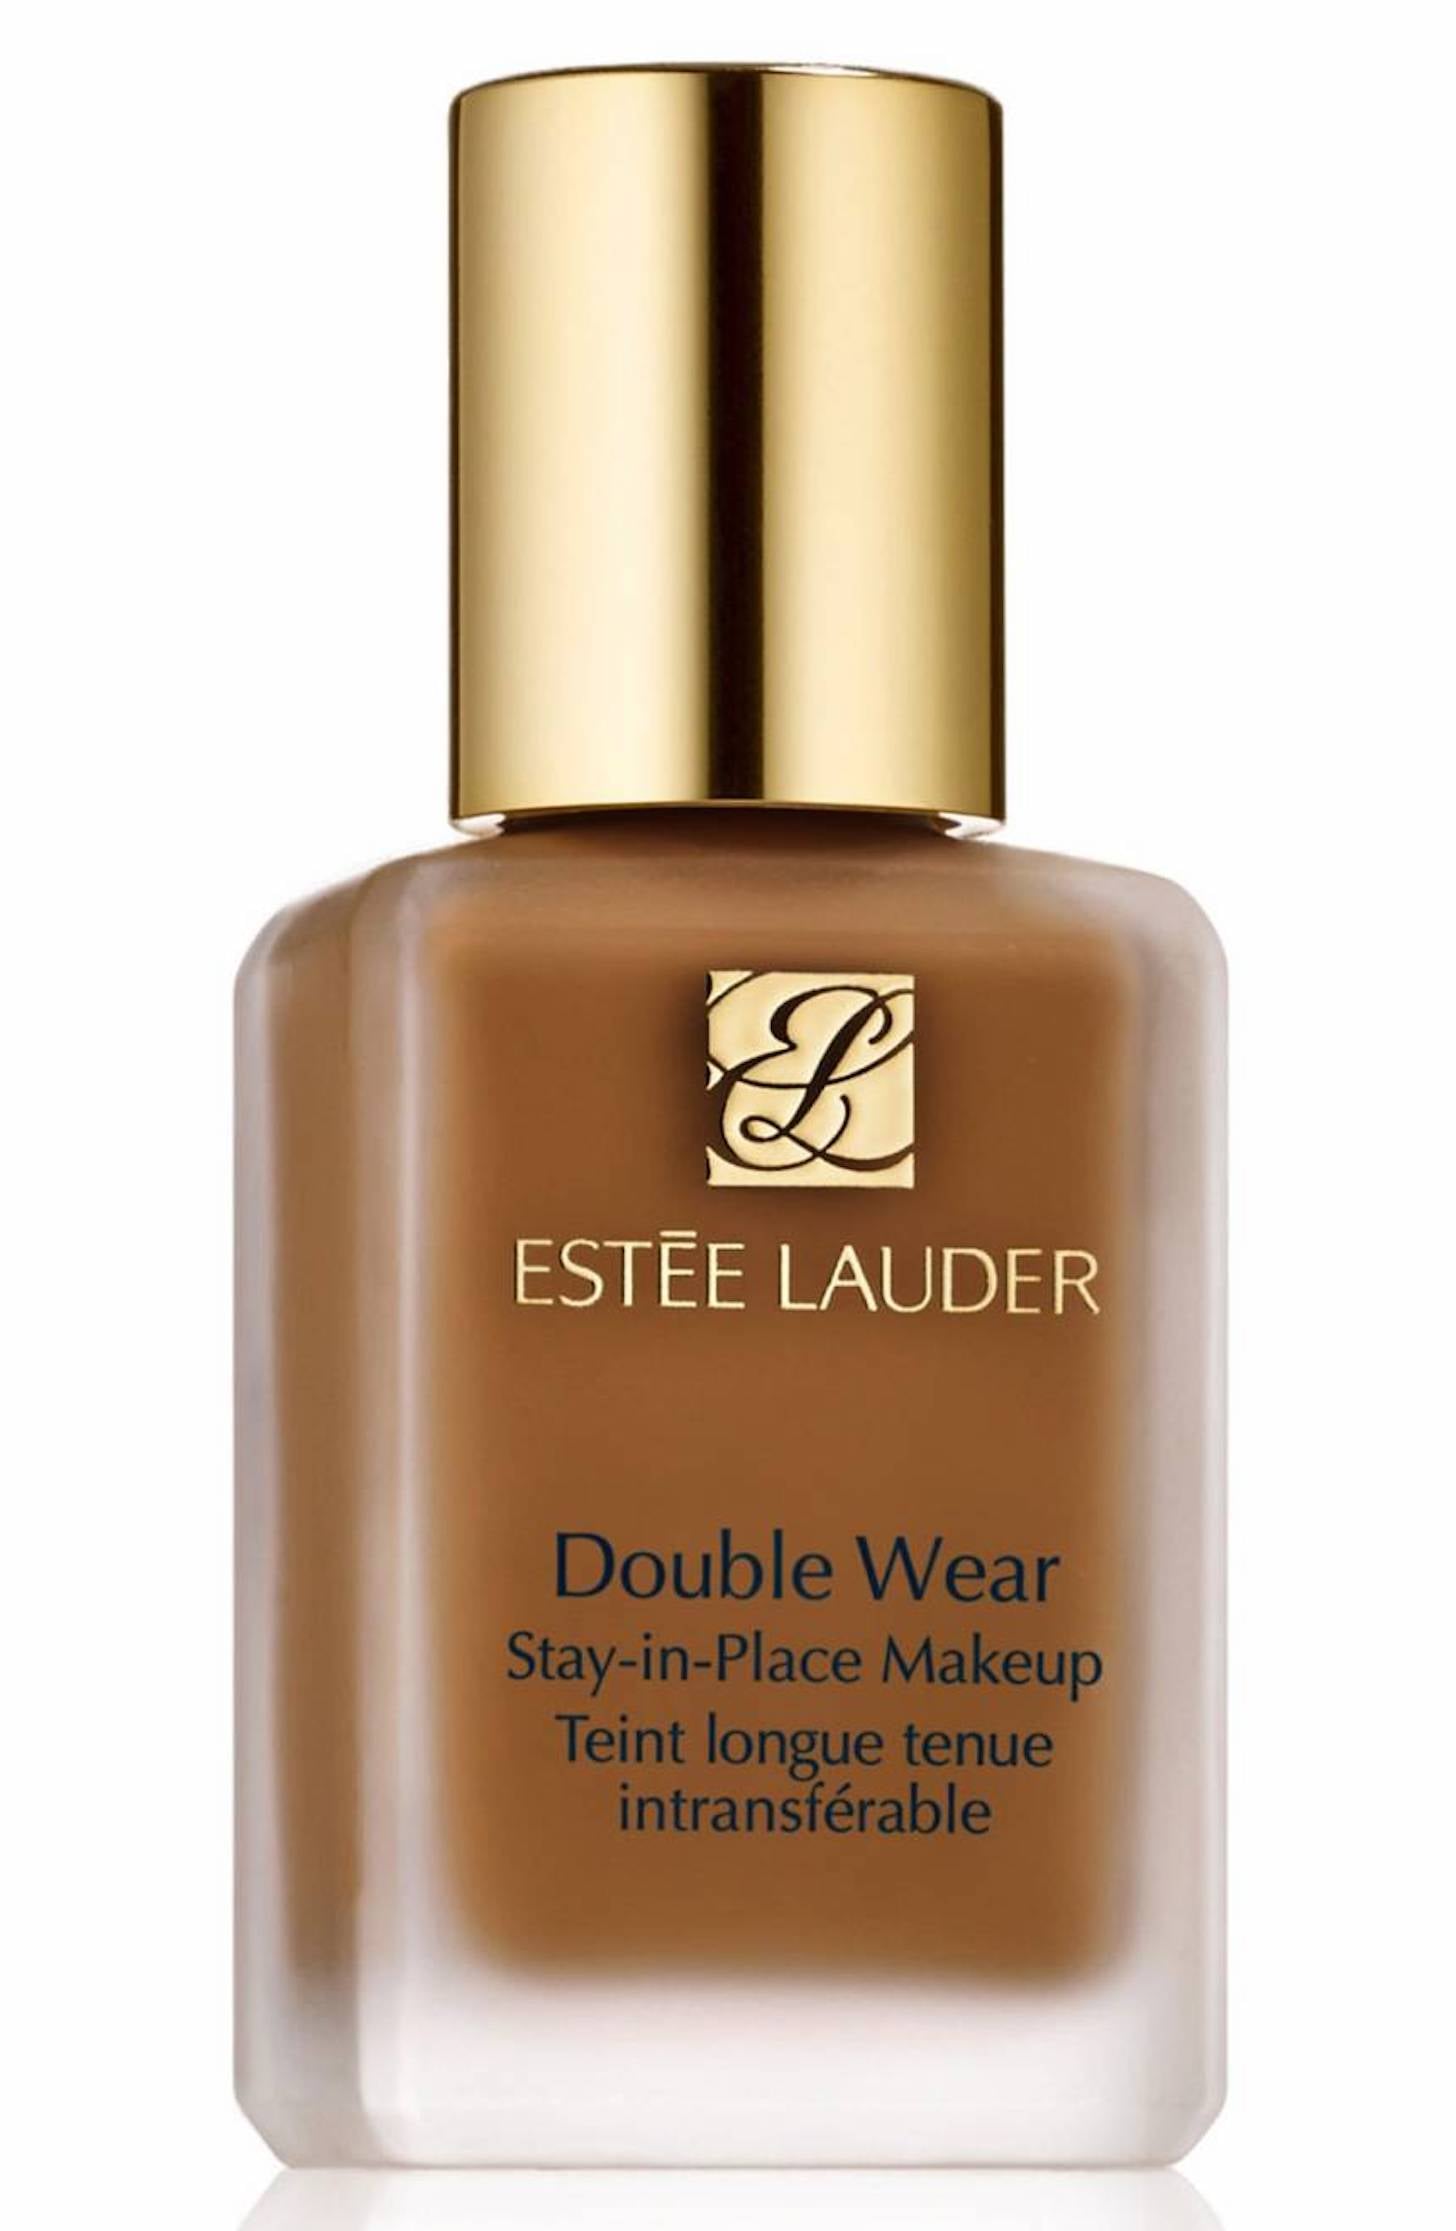 Estee Lauder Free Gift With Purchase 2018 Schedule